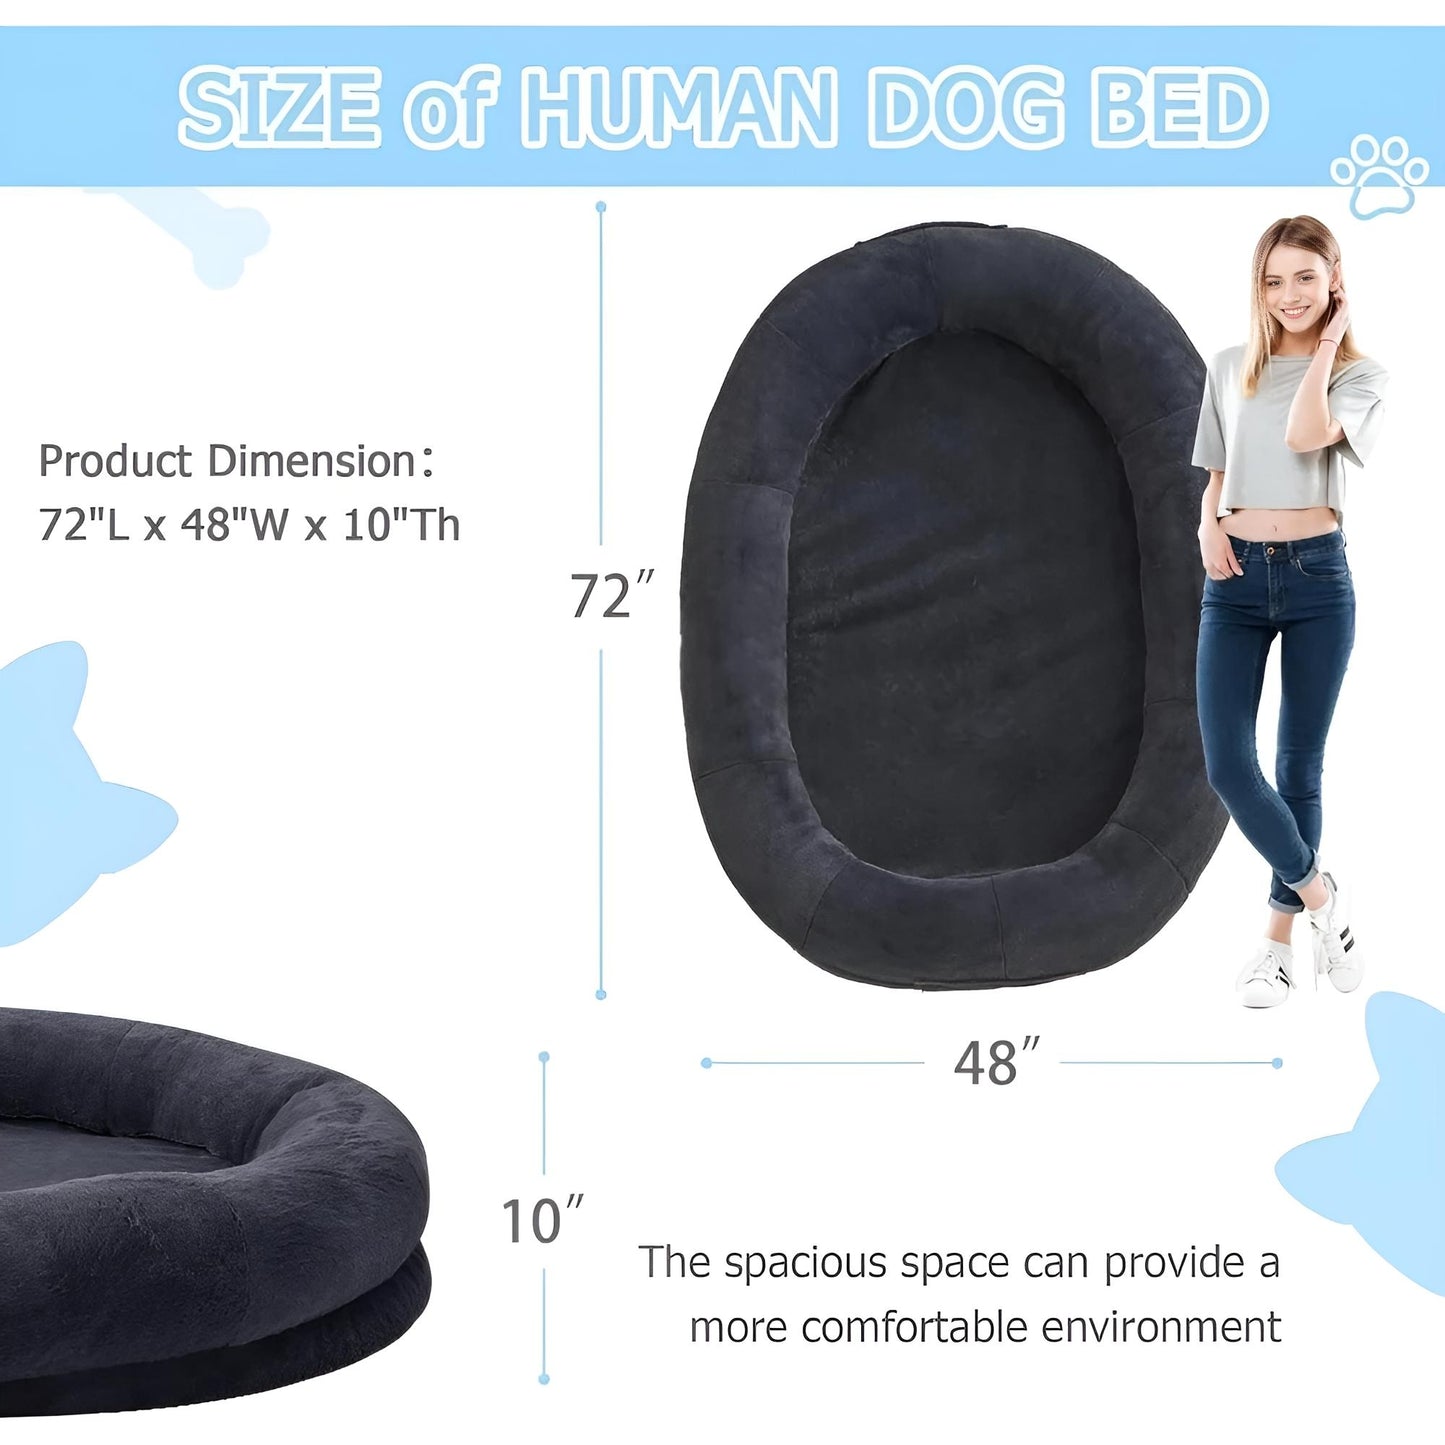 Size of Giant Dog Bed for Humans